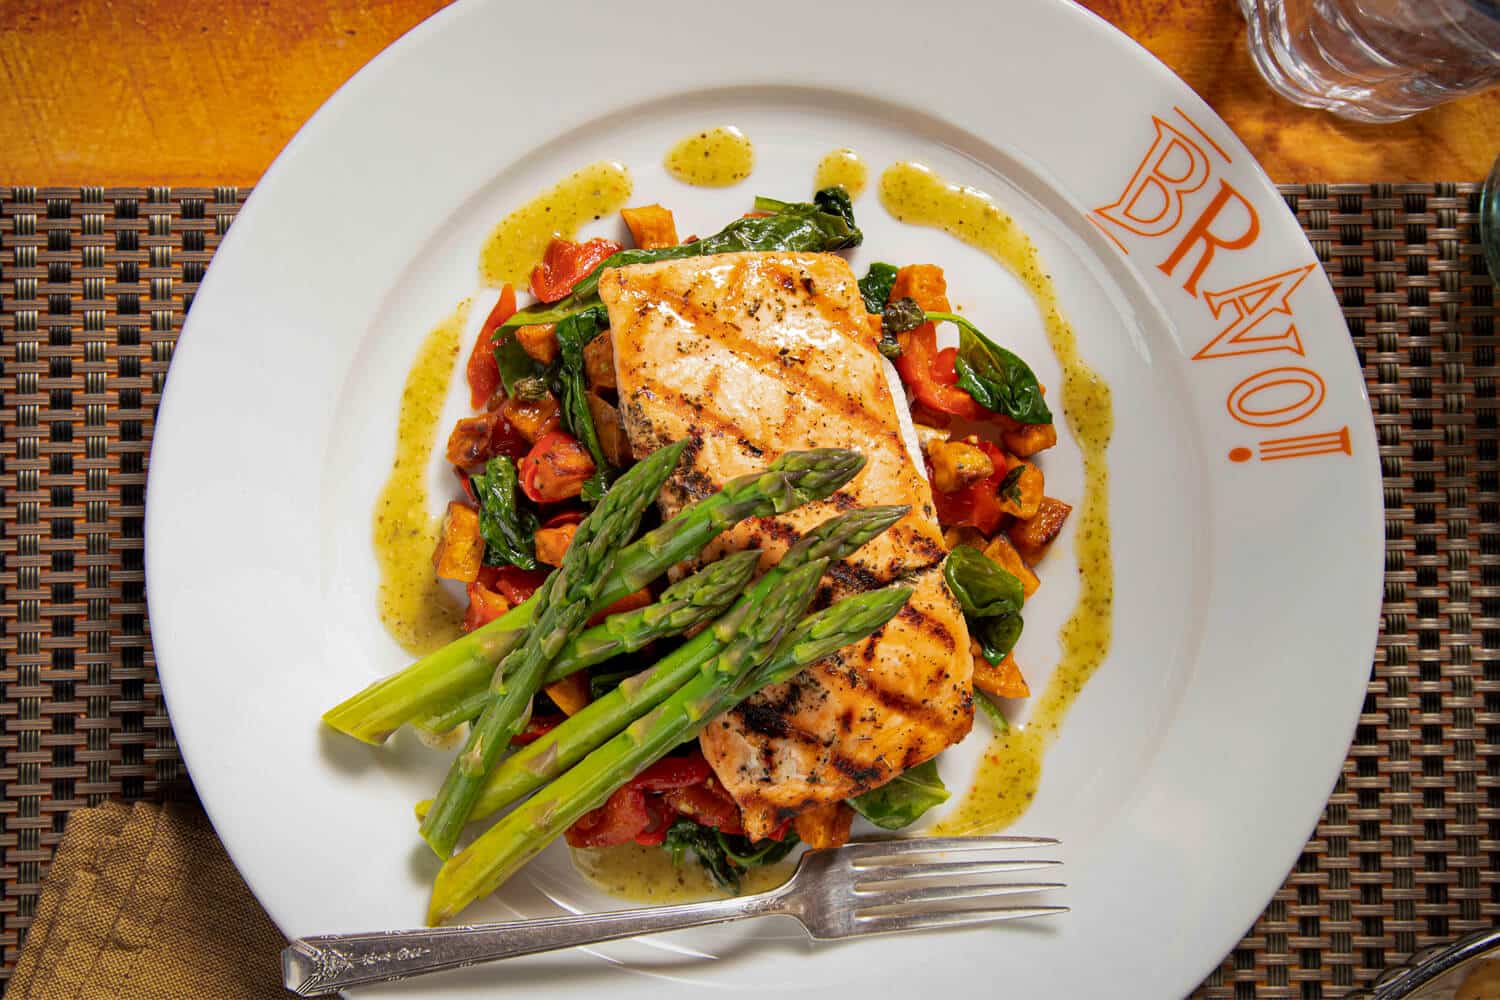 Grilled Salmon Fresca with asparagus in a plate from Bravo